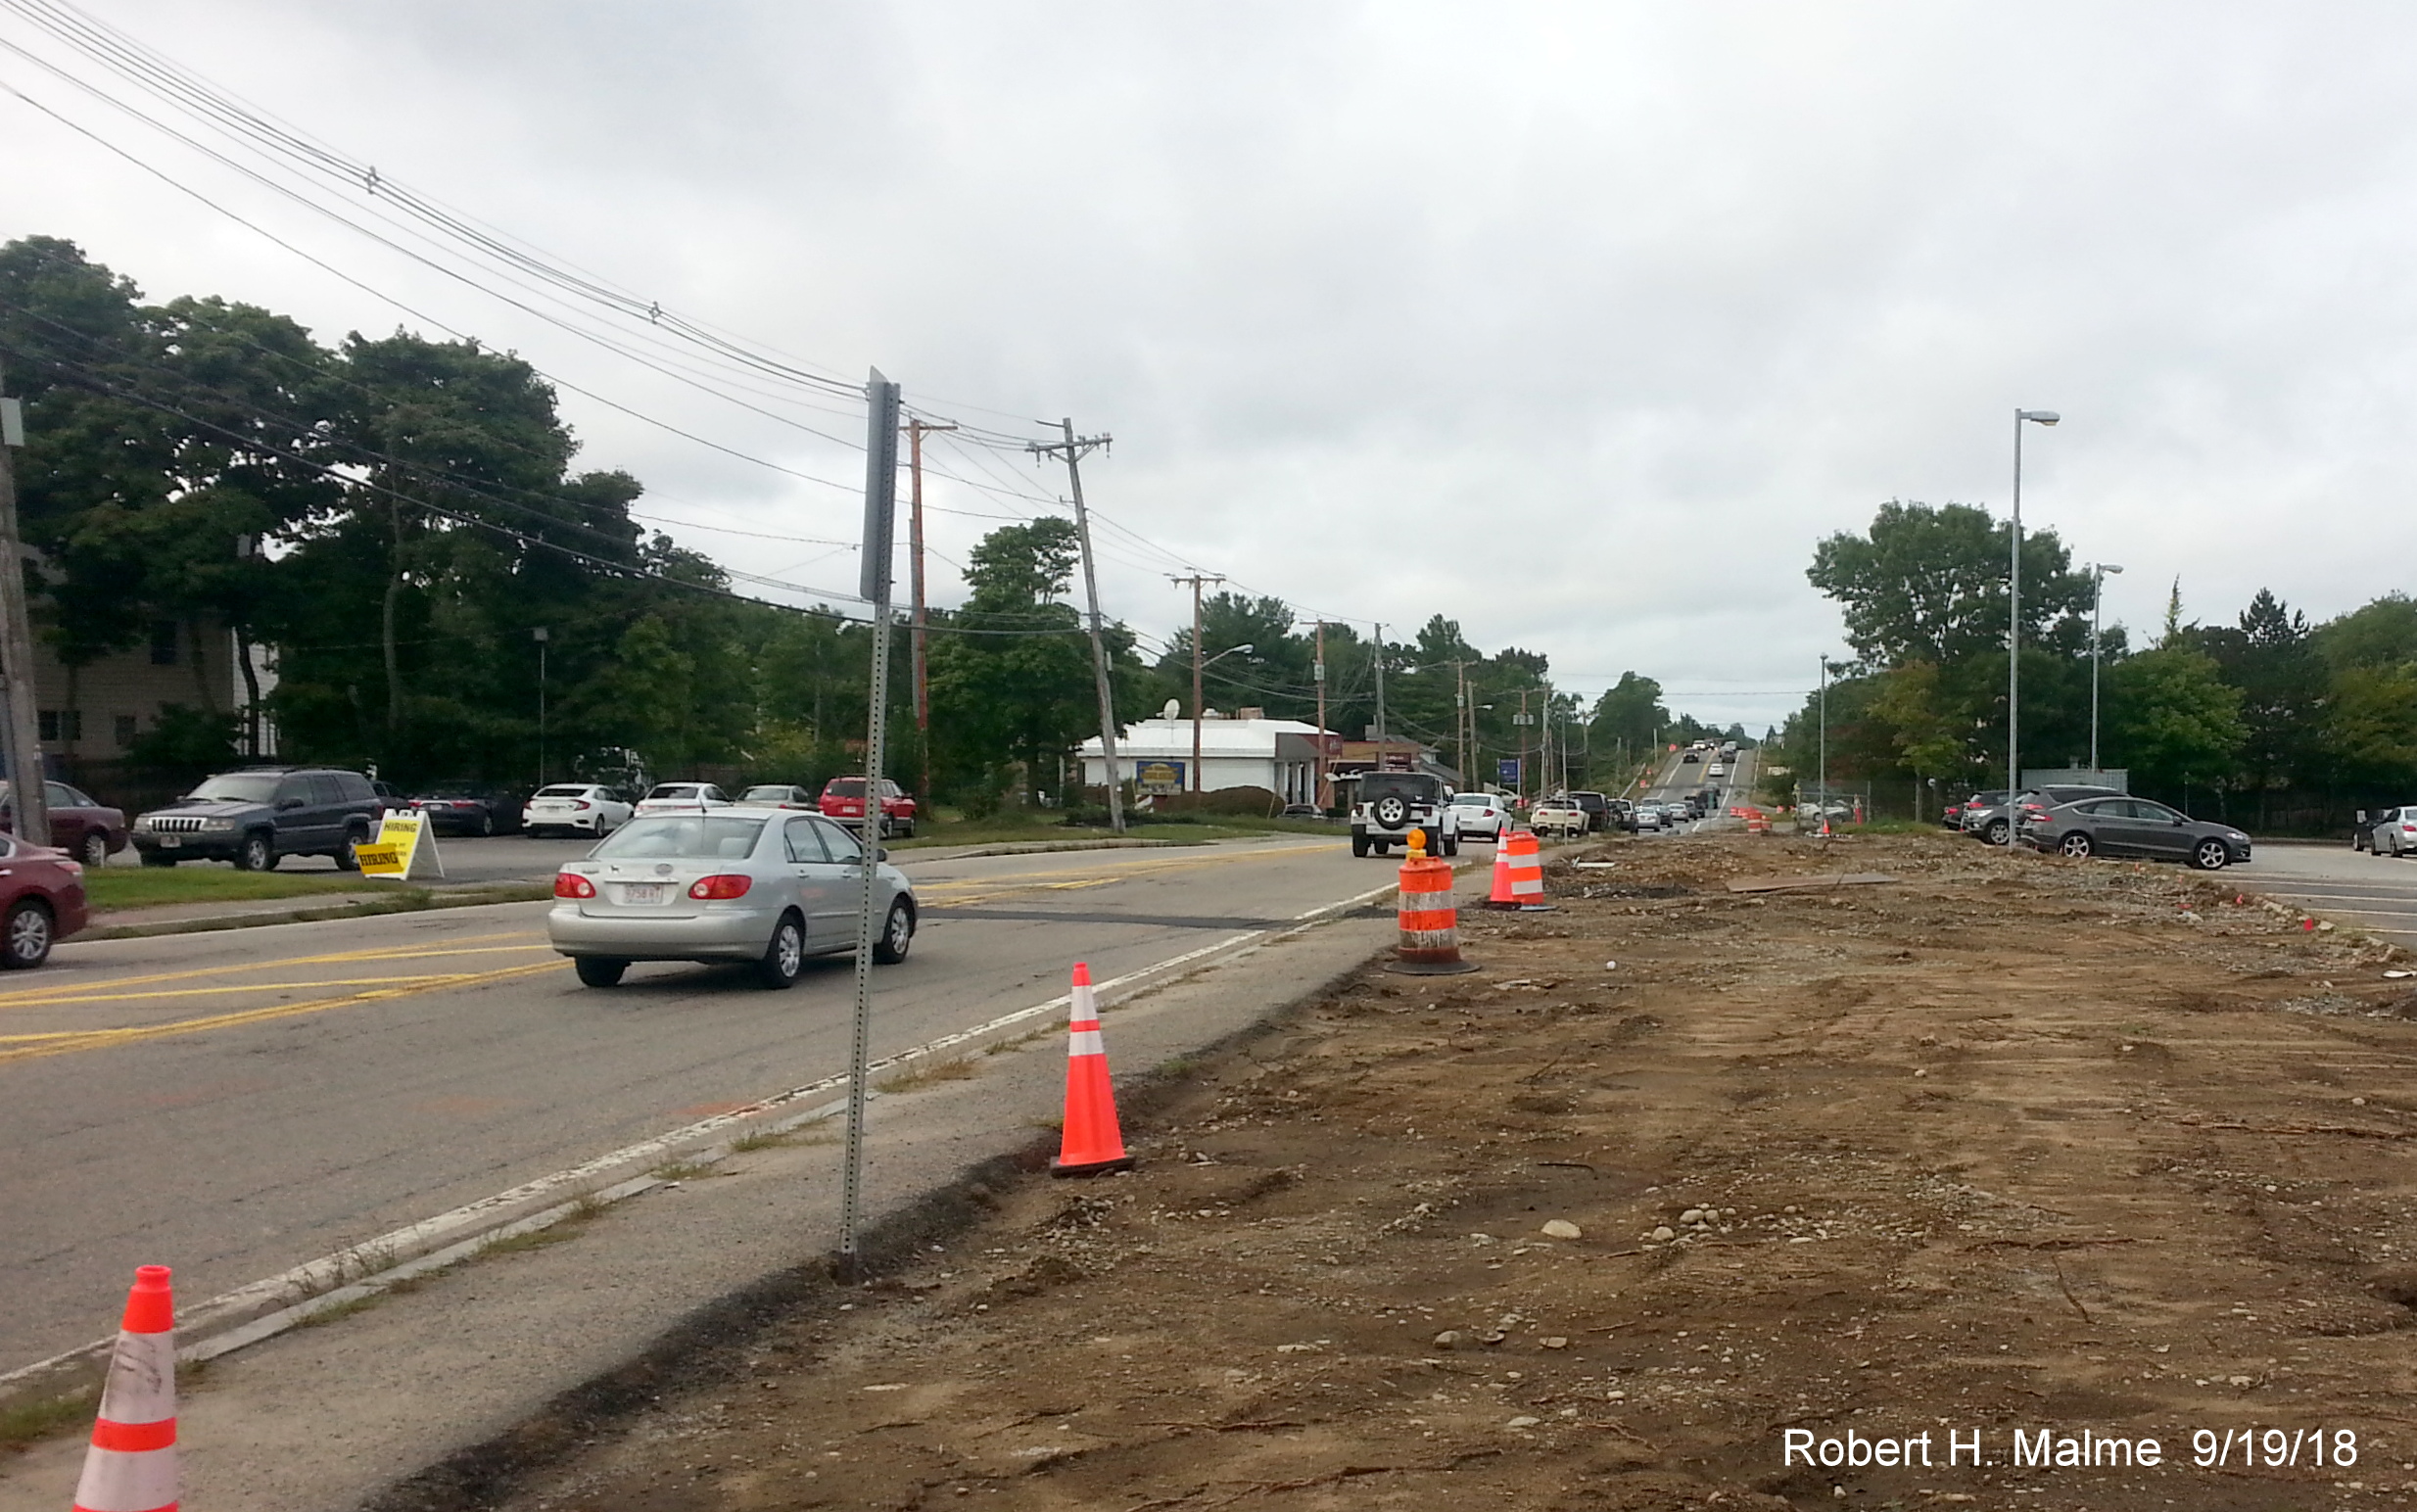 Image of cleared area for future MA 18 North lane by South Weymouth commuter rail station in Sept. 2018